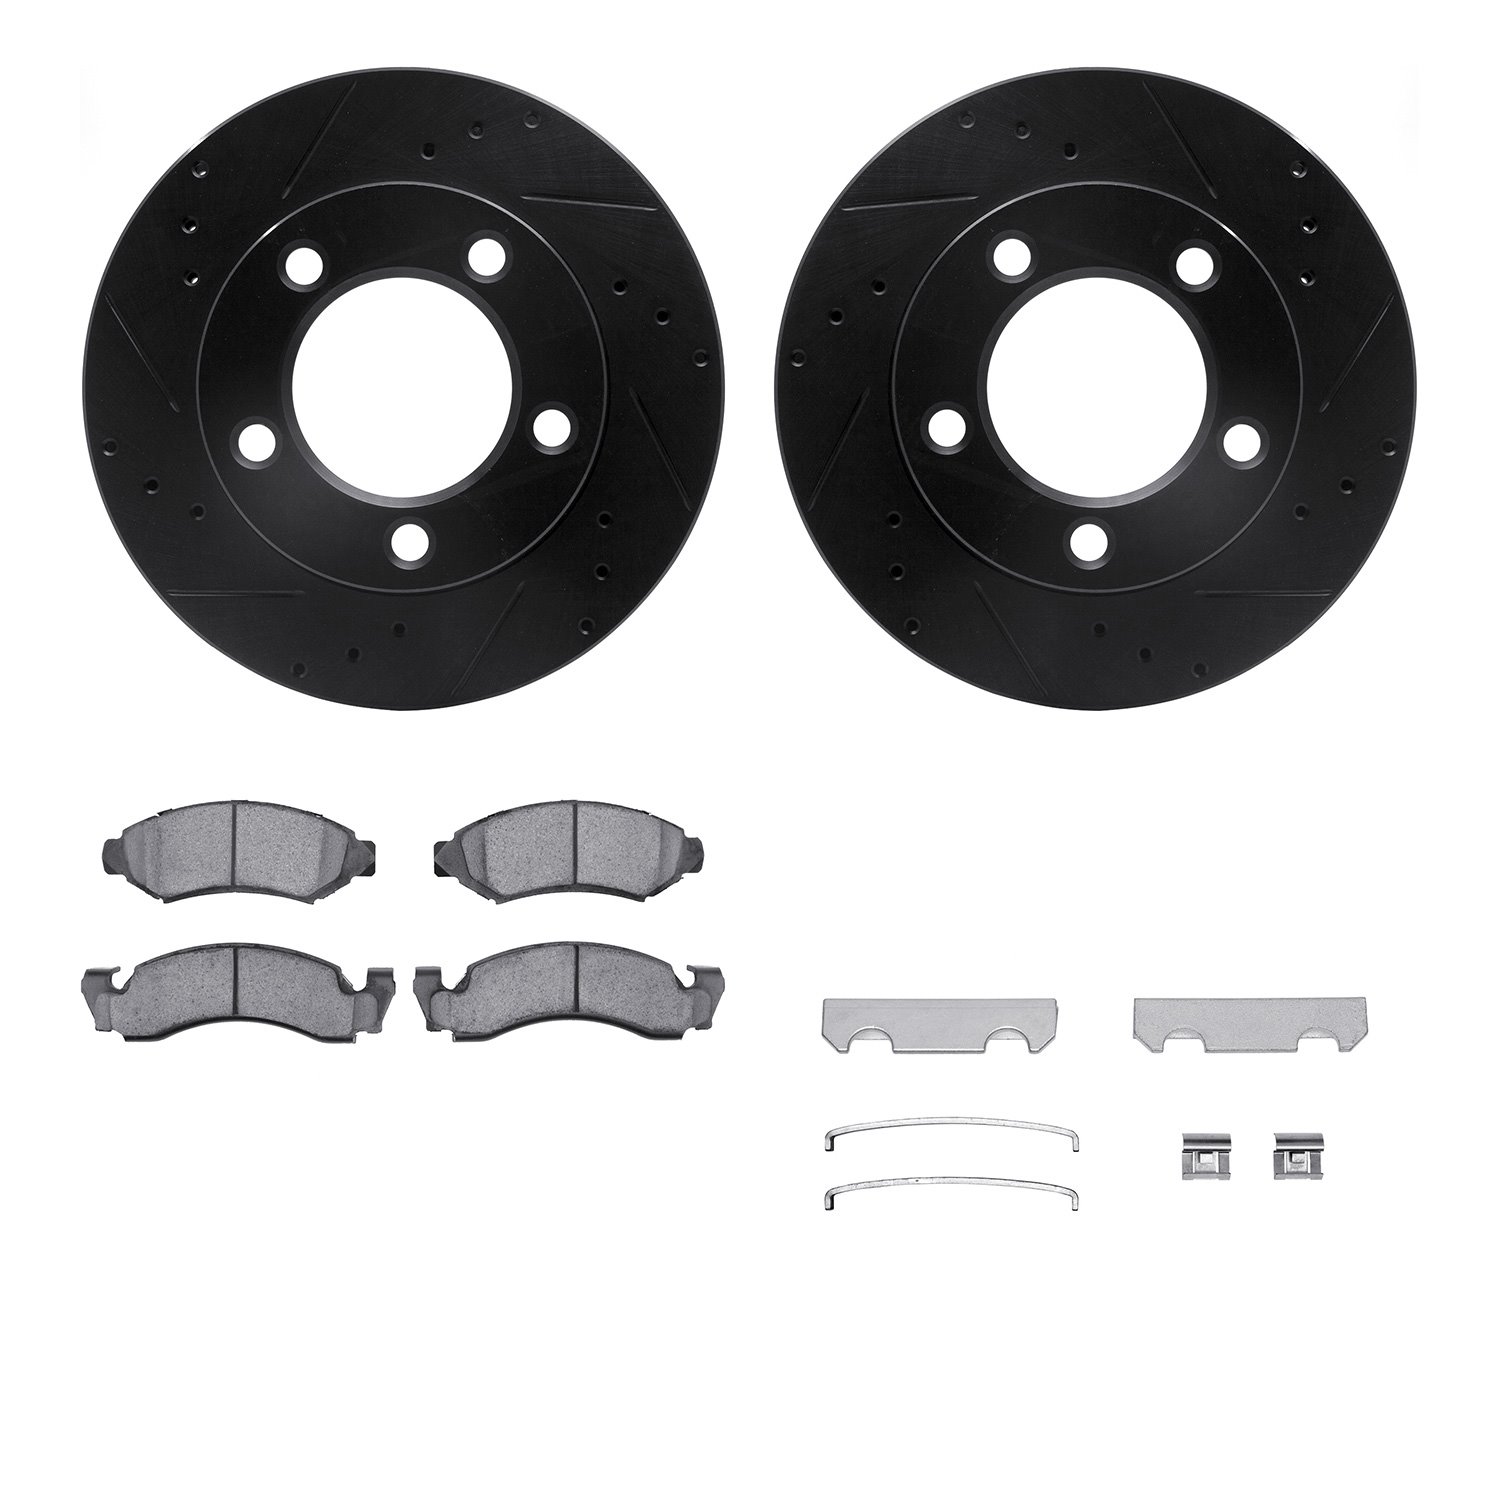 8412-54009 Drilled/Slotted Brake Rotors with Ultimate-Duty Brake Pads Kit & Hardware [Black], 1976-1985 Ford/Lincoln/Mercury/Maz